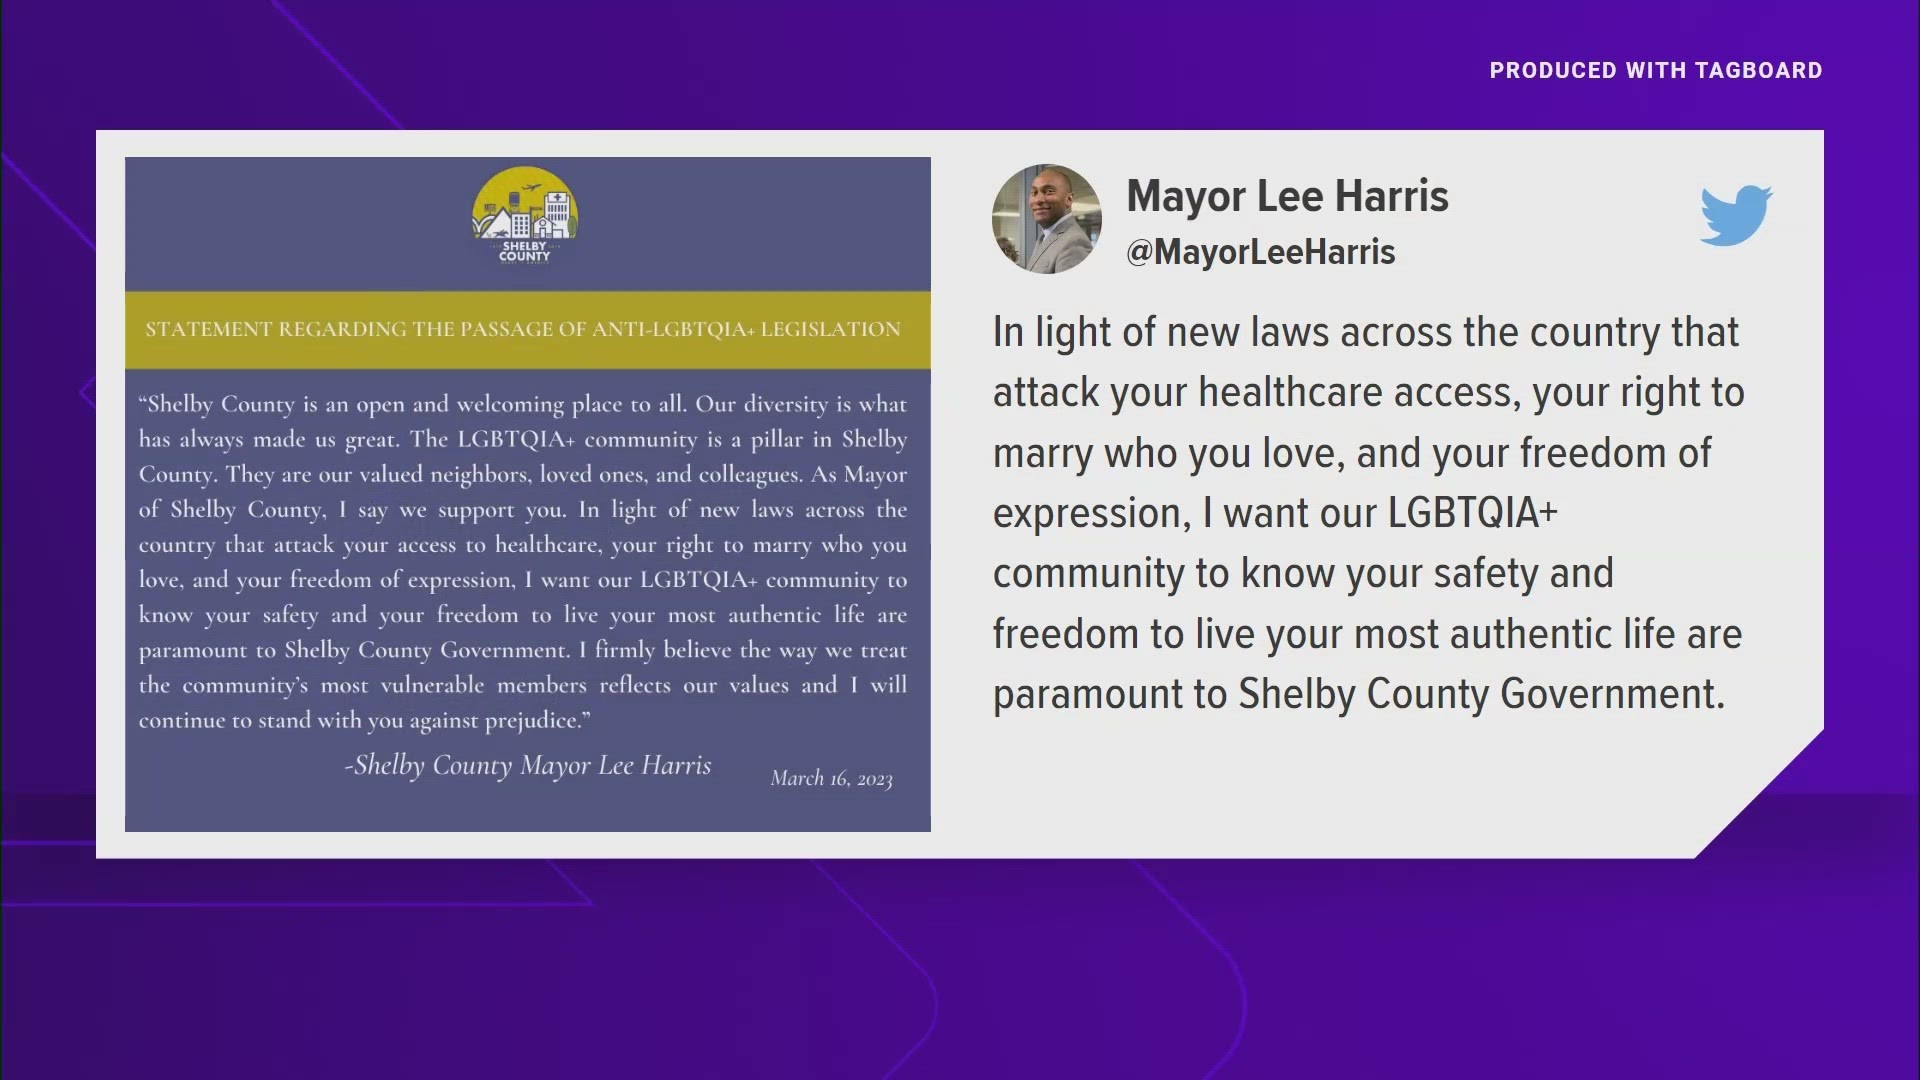 In a post to social media, Harris said he said the safety and freedom of LGBTQIA+ community in Shelby County is “paramount.”